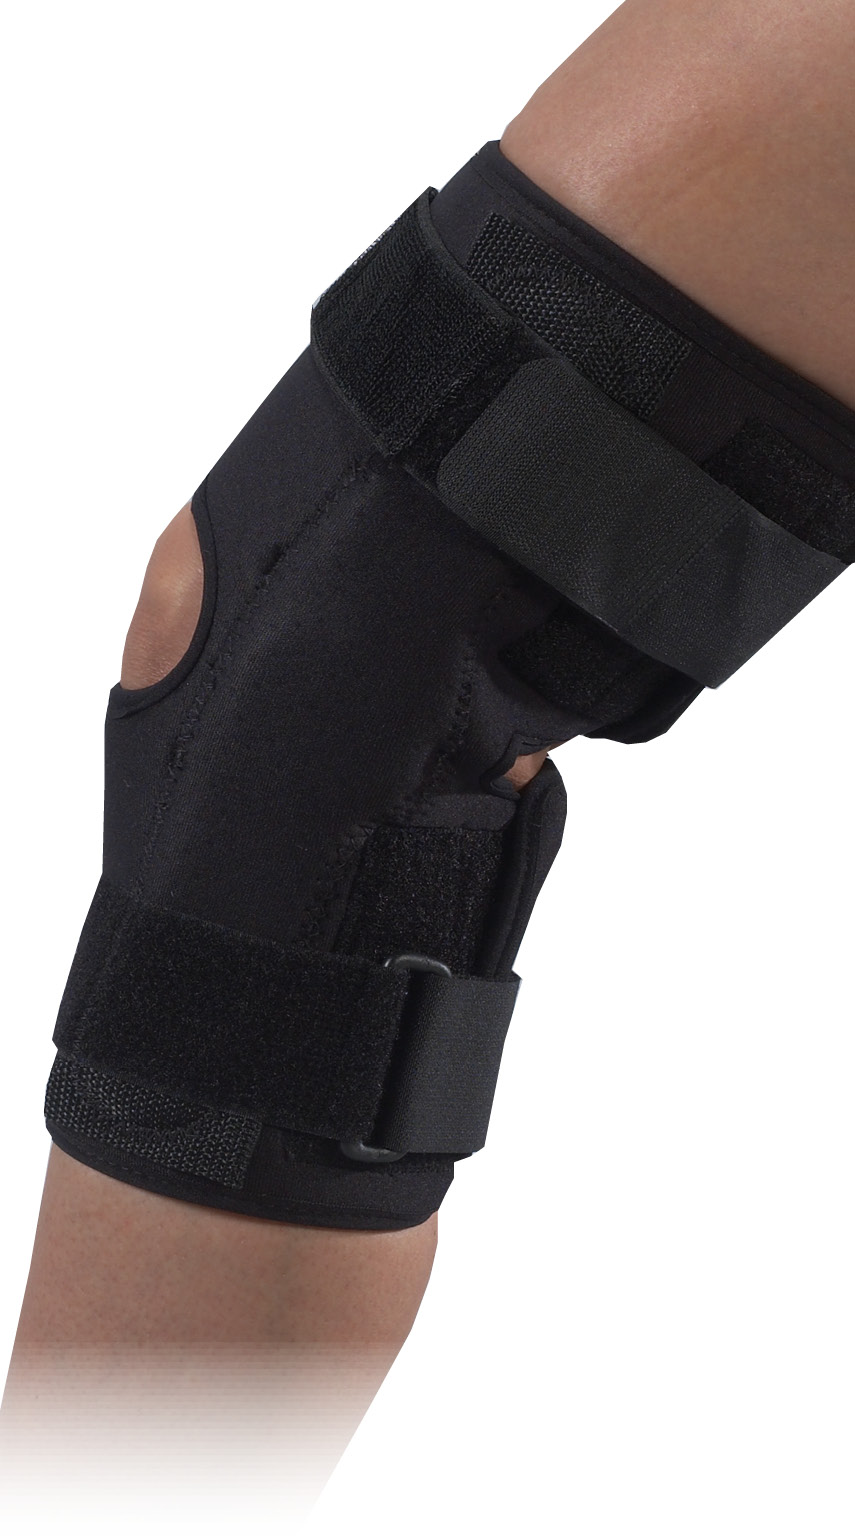 X3 Neoprene Hinged Knee Support - Rom, 2 Extra Large